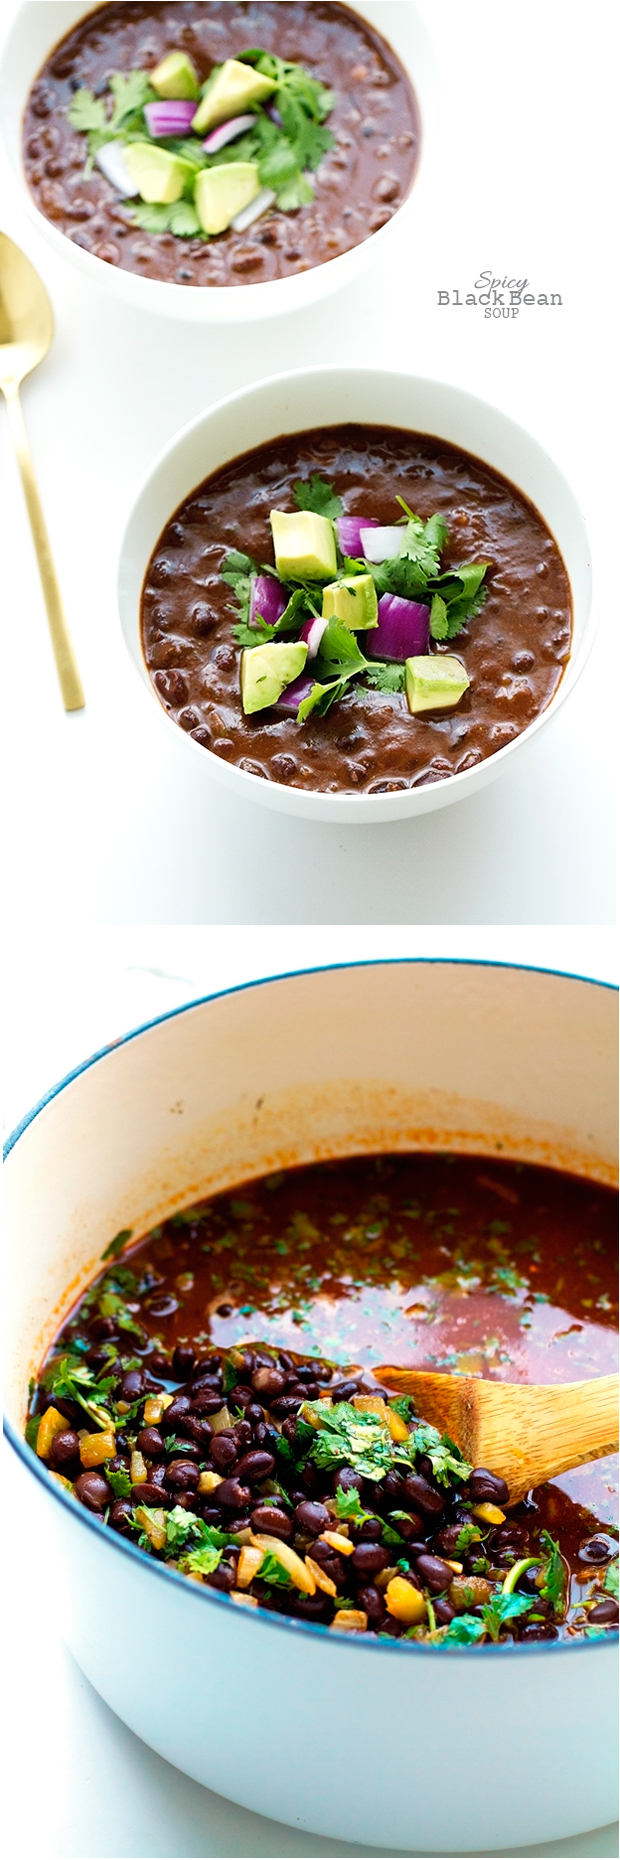 Spicy Black Bean Soup that's vegan and totally delicious! #blackbeansoup #spicyblackbeansoup #blackbeans | Littlespicejar.com